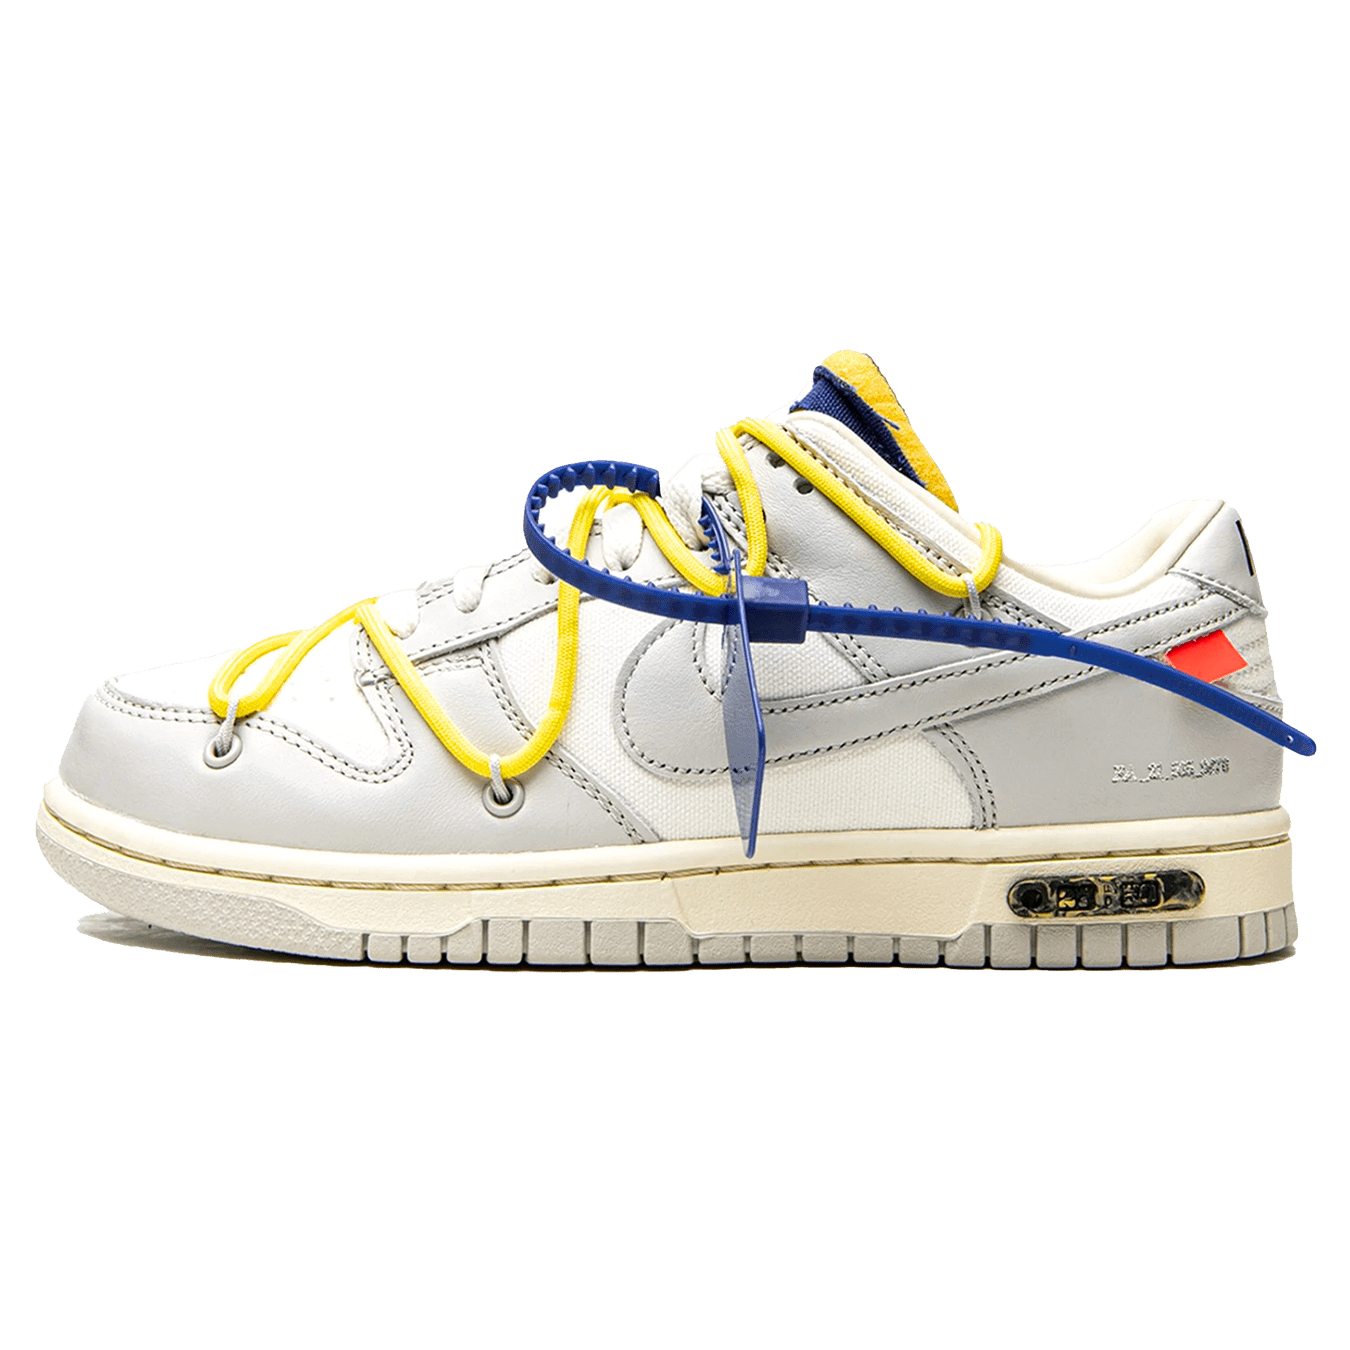 Off White x Nike Dunk Low Lot 27 of 50 DM1602 120